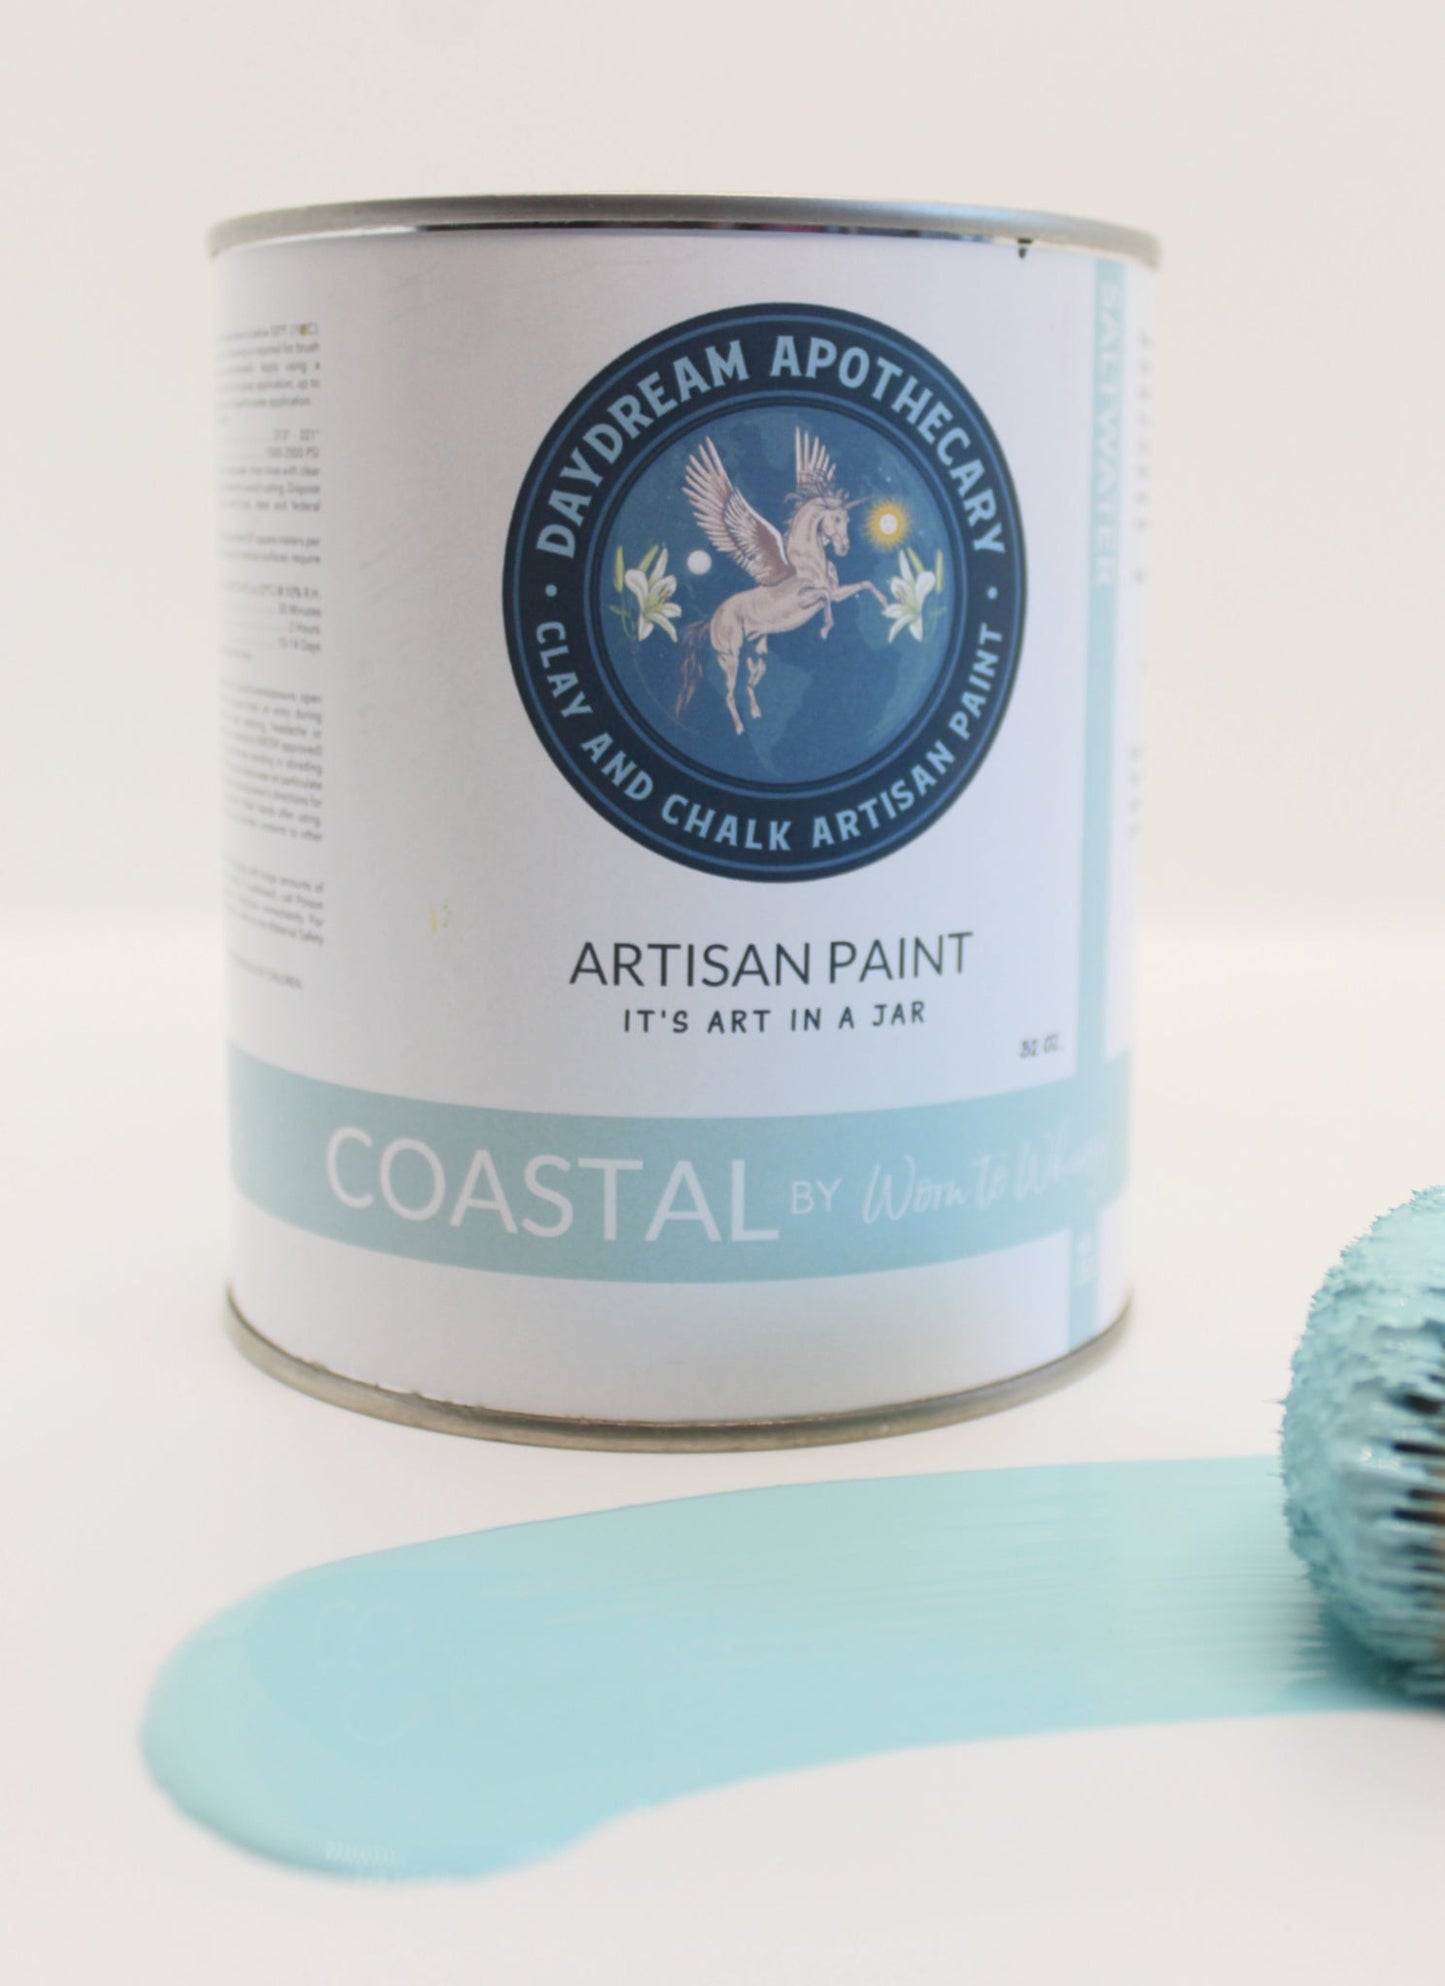 CLOSEOUT SALE! Saltwater🌊 COASTAL by Worn to Whimsy | Daydream Apothecary Clay and Chalk Artisan Paint